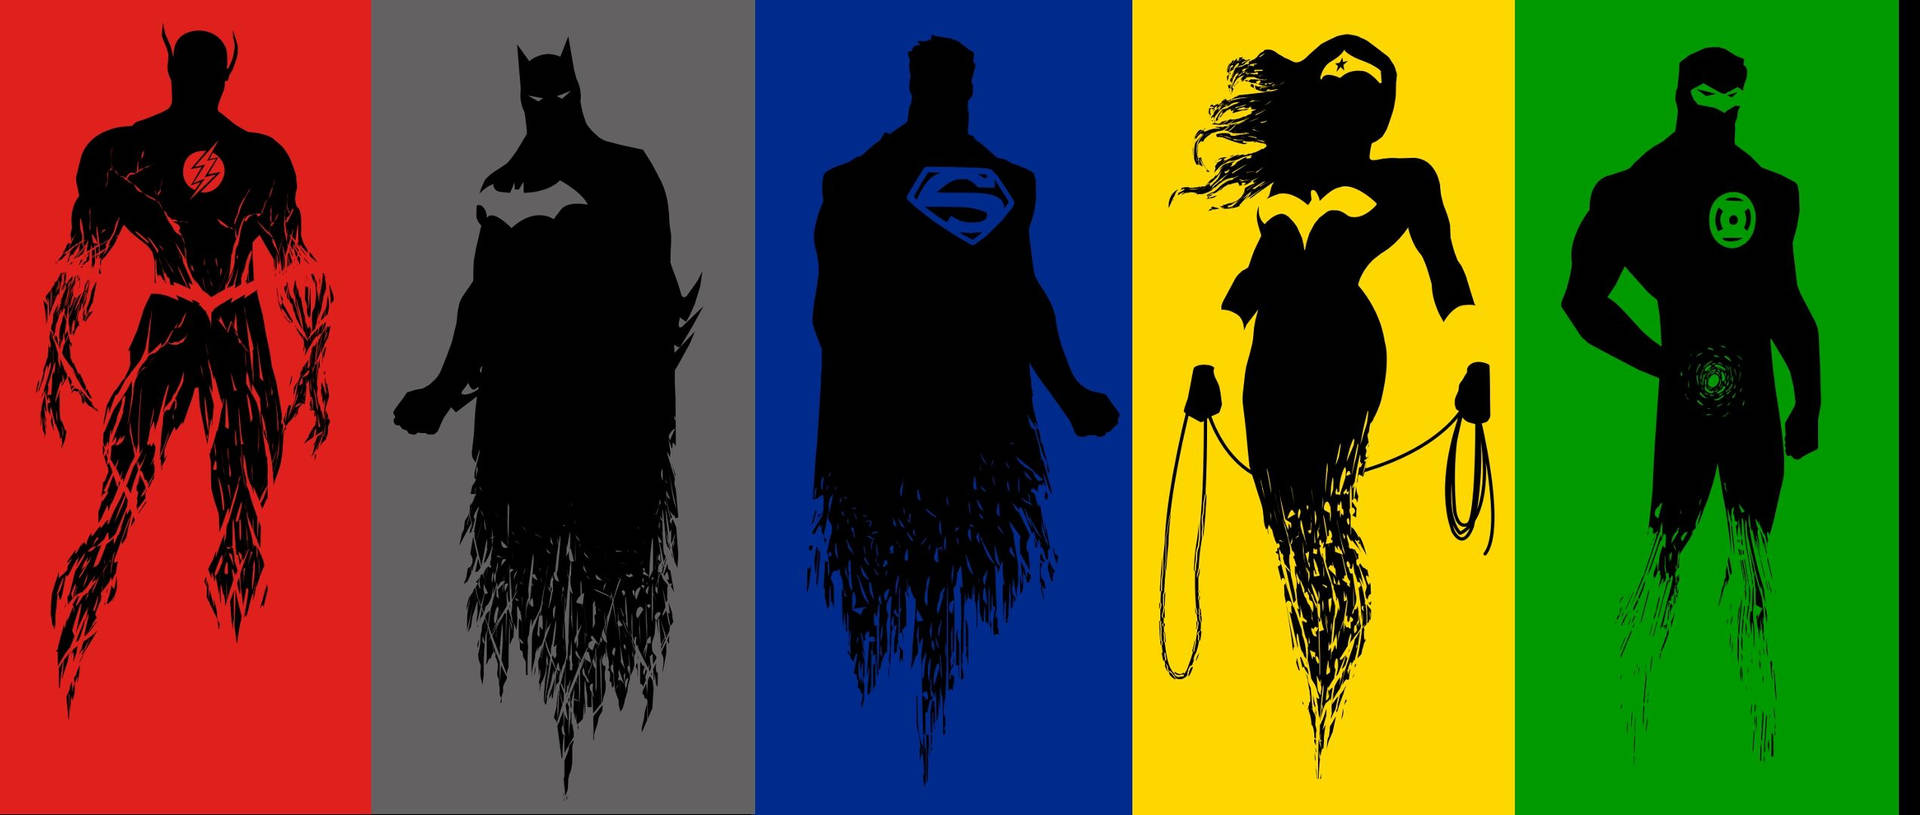 Silhouettejustice League Inramad Affisch. Wallpaper